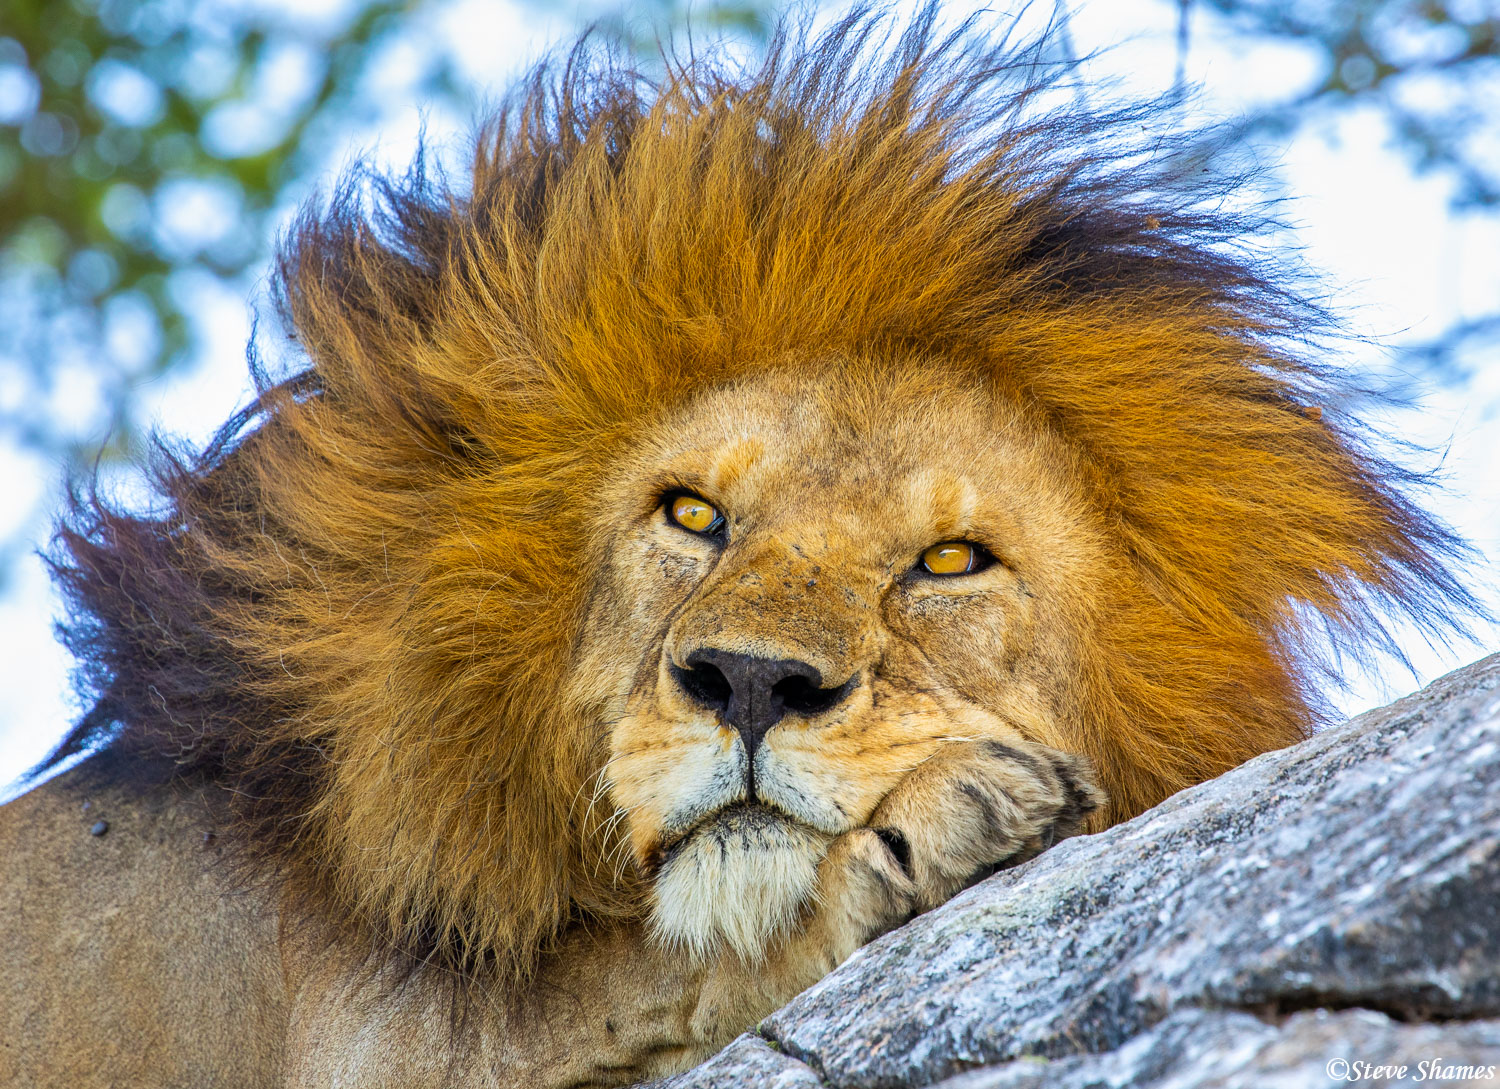 Our lion Ziggy, taking a little rest in the shade.